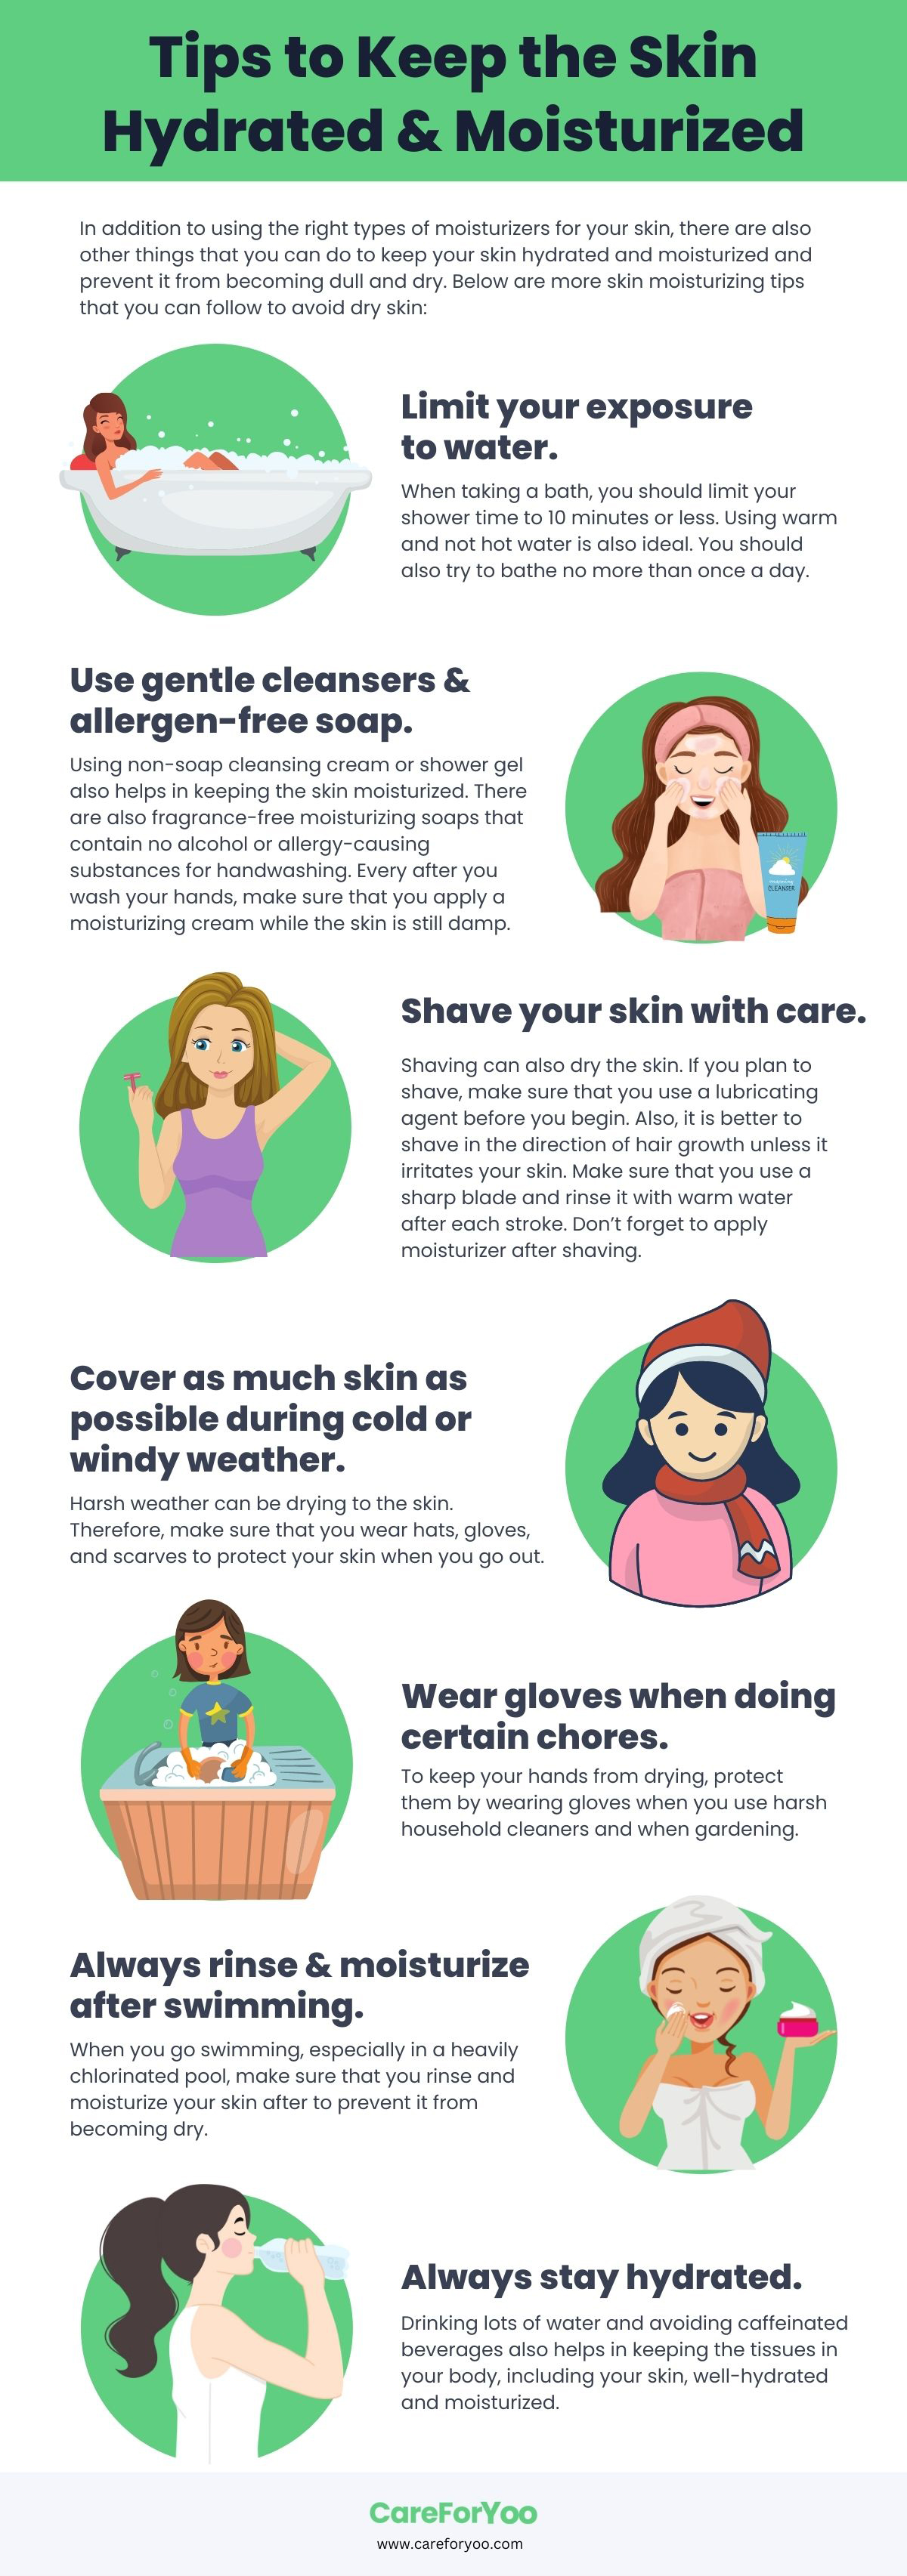 Tips to Keep the Skin Hydrated and Moisturized